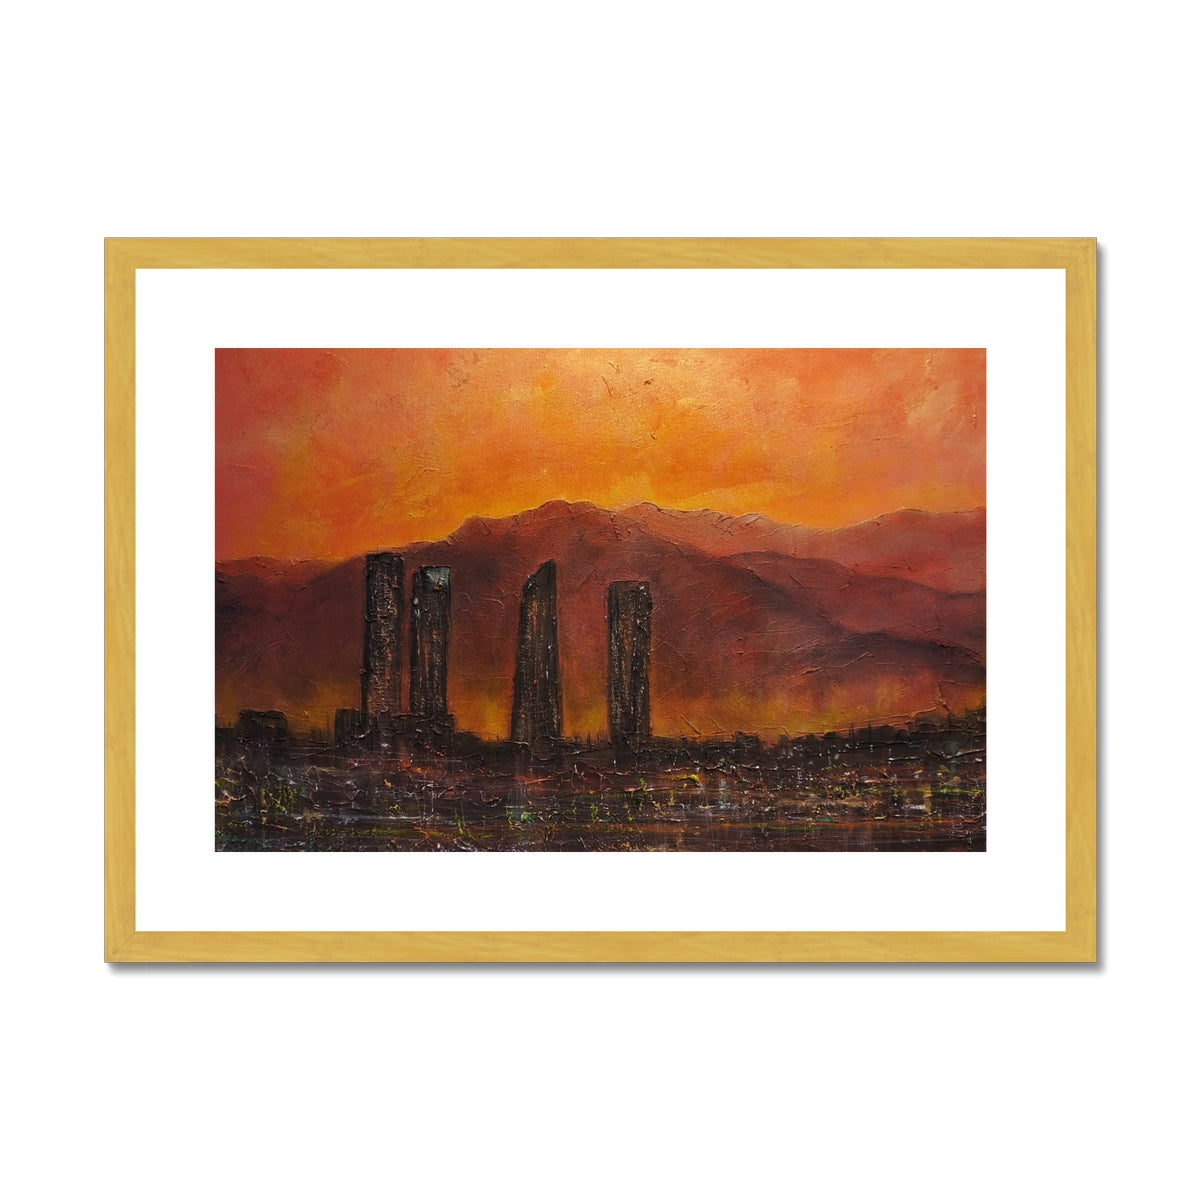 Madrid Dusk Painting | Antique Framed & Mounted Prints From Scotland-Antique Framed & Mounted Prints-World Art Gallery-A2 Landscape-Gold Frame-Paintings, Prints, Homeware, Art Gifts From Scotland By Scottish Artist Kevin Hunter